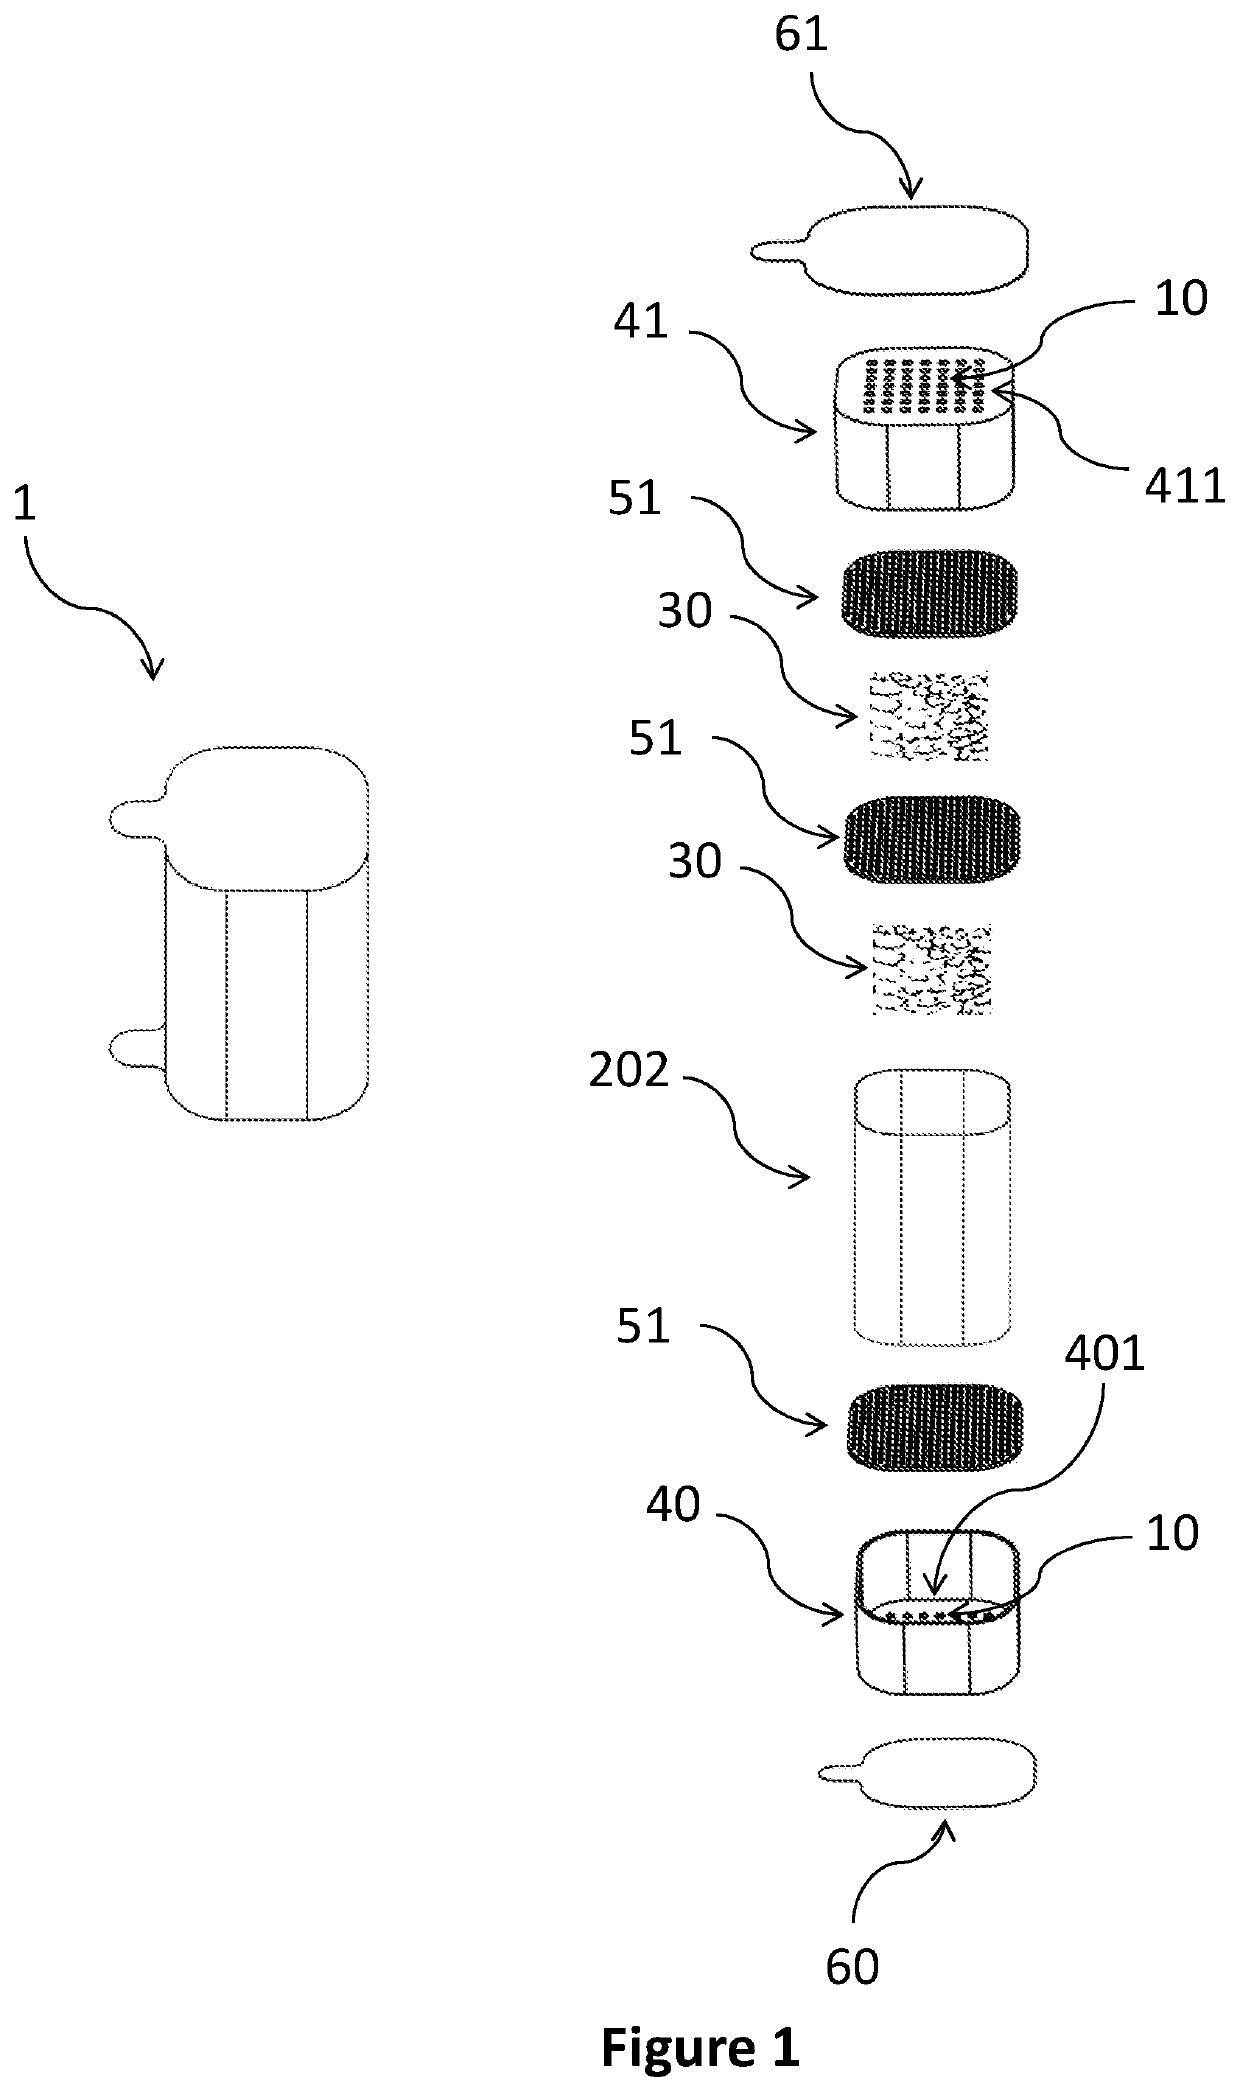 Disposable capsule for the efficient generation of herbal vapor with vapor producing devices